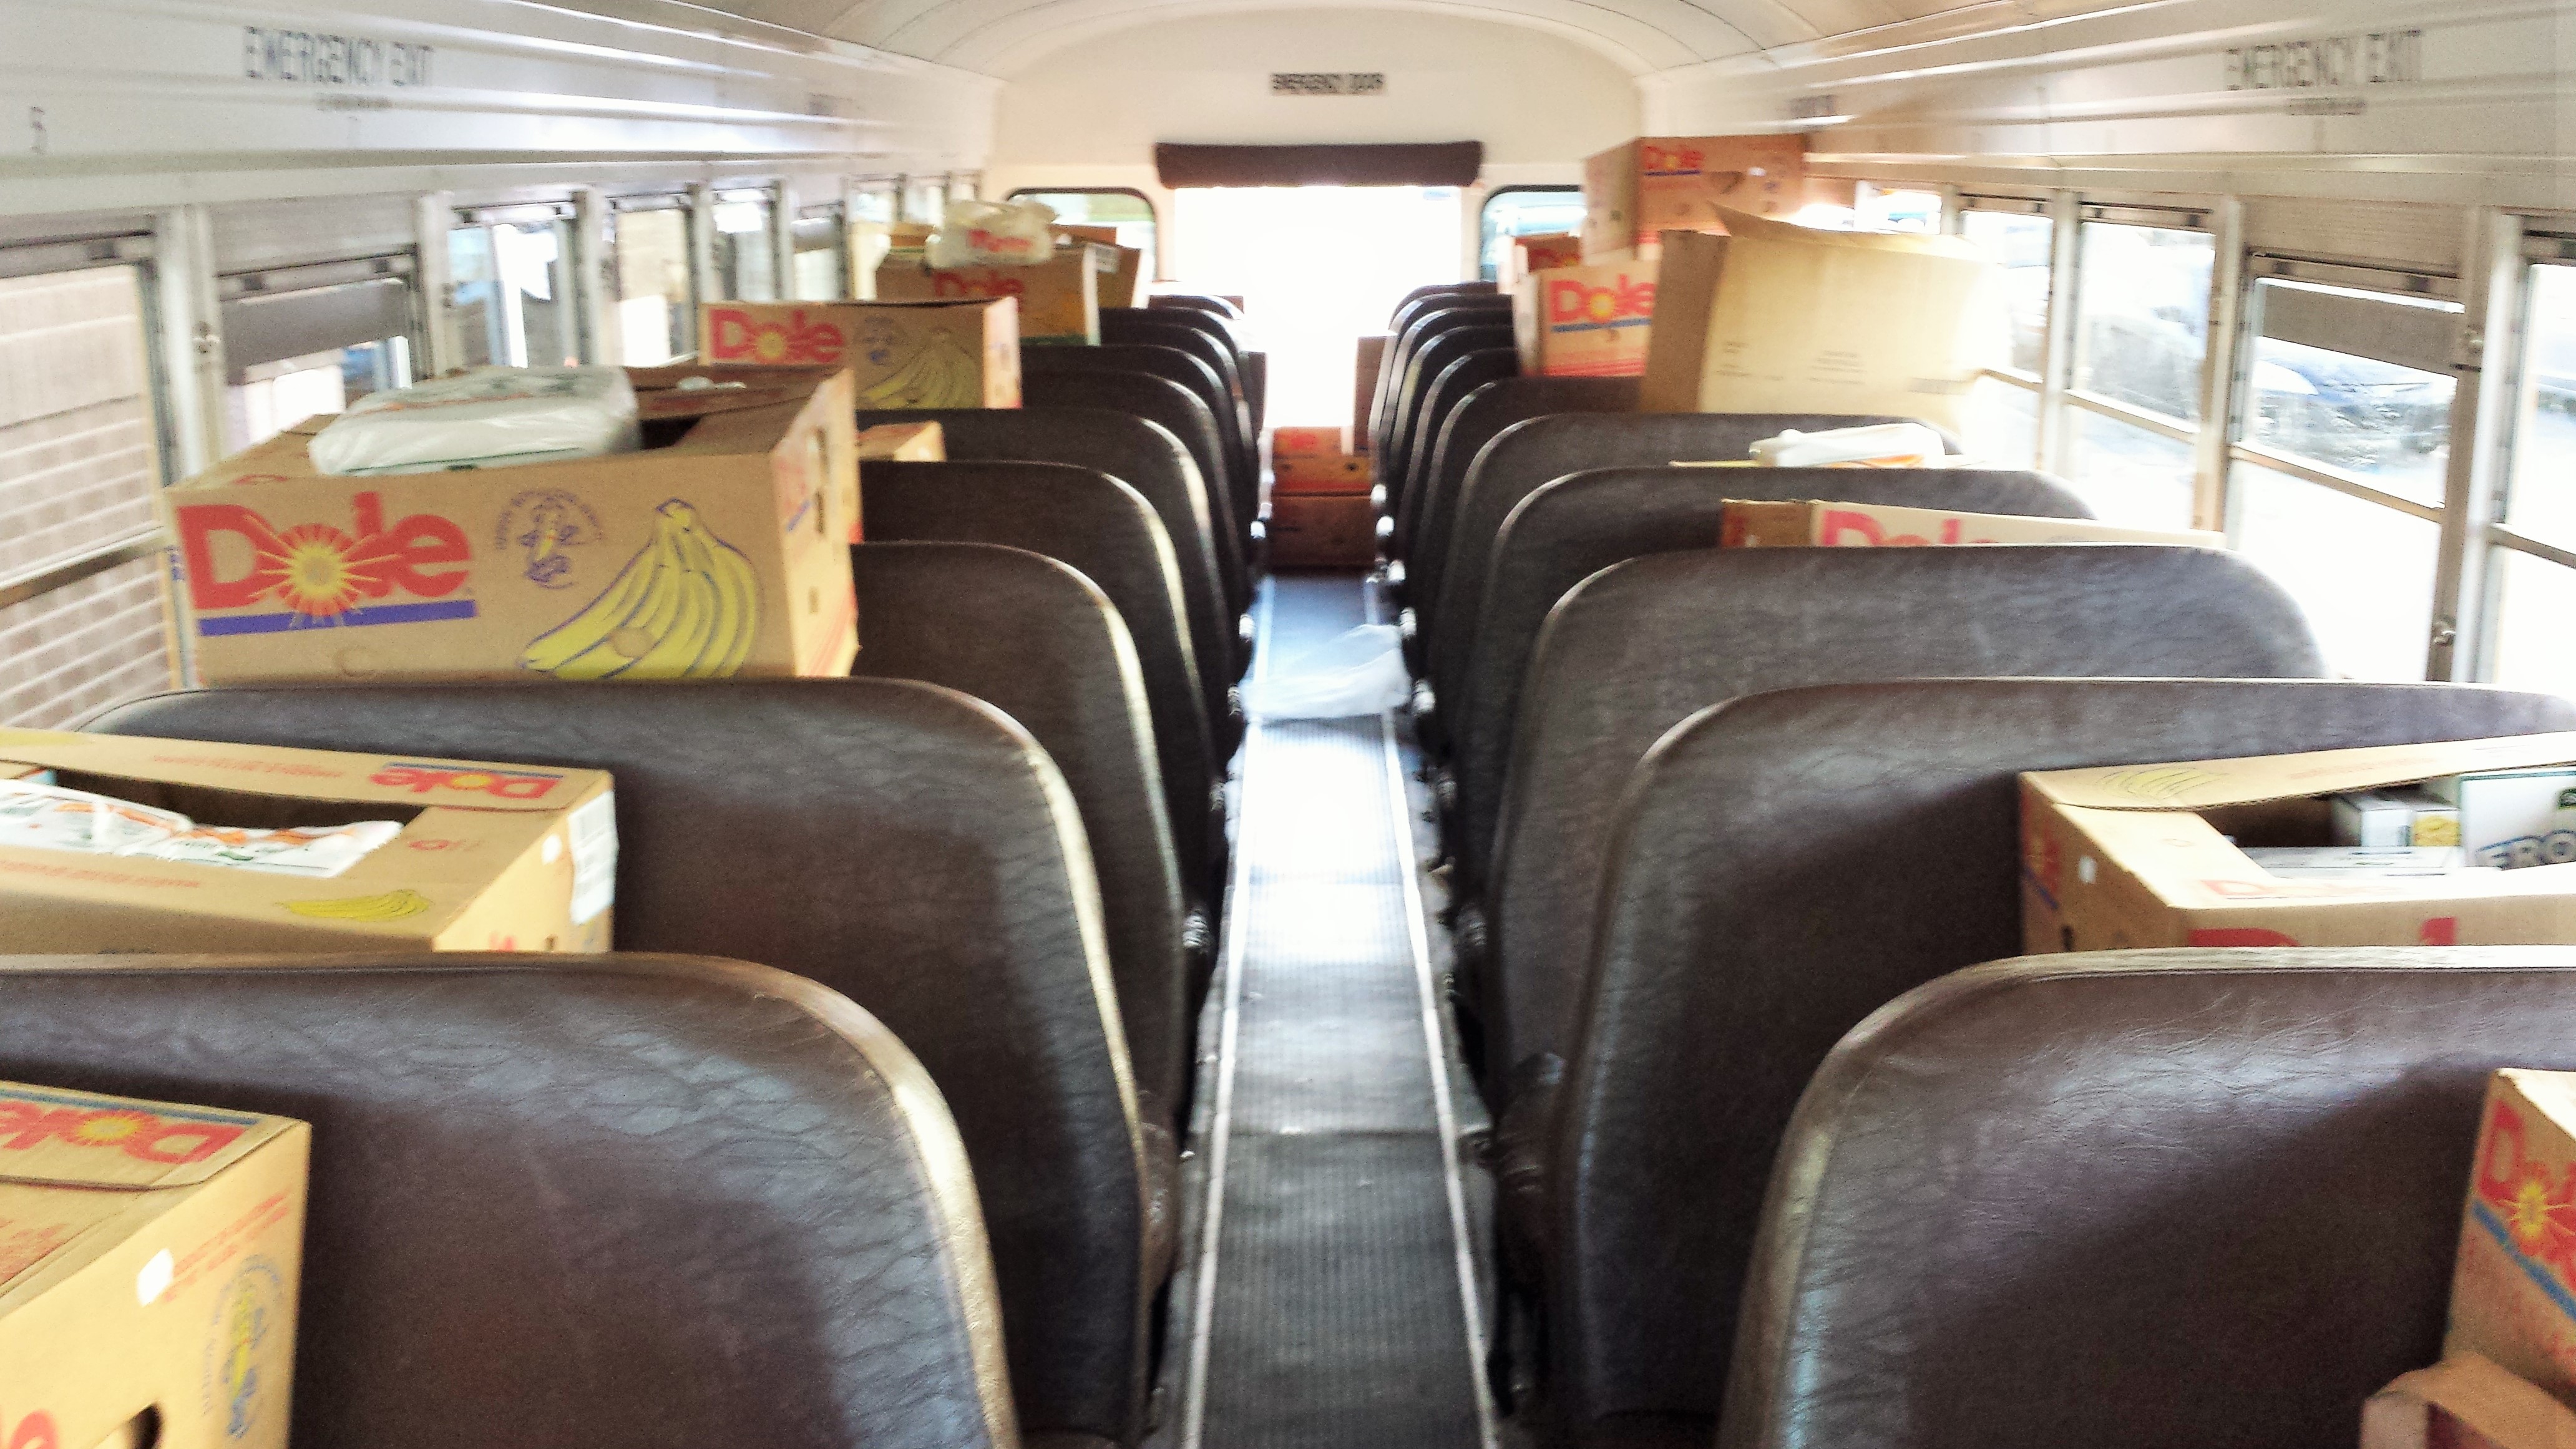 Near the end of the day, the bus was indeed pretty well stuffed!!